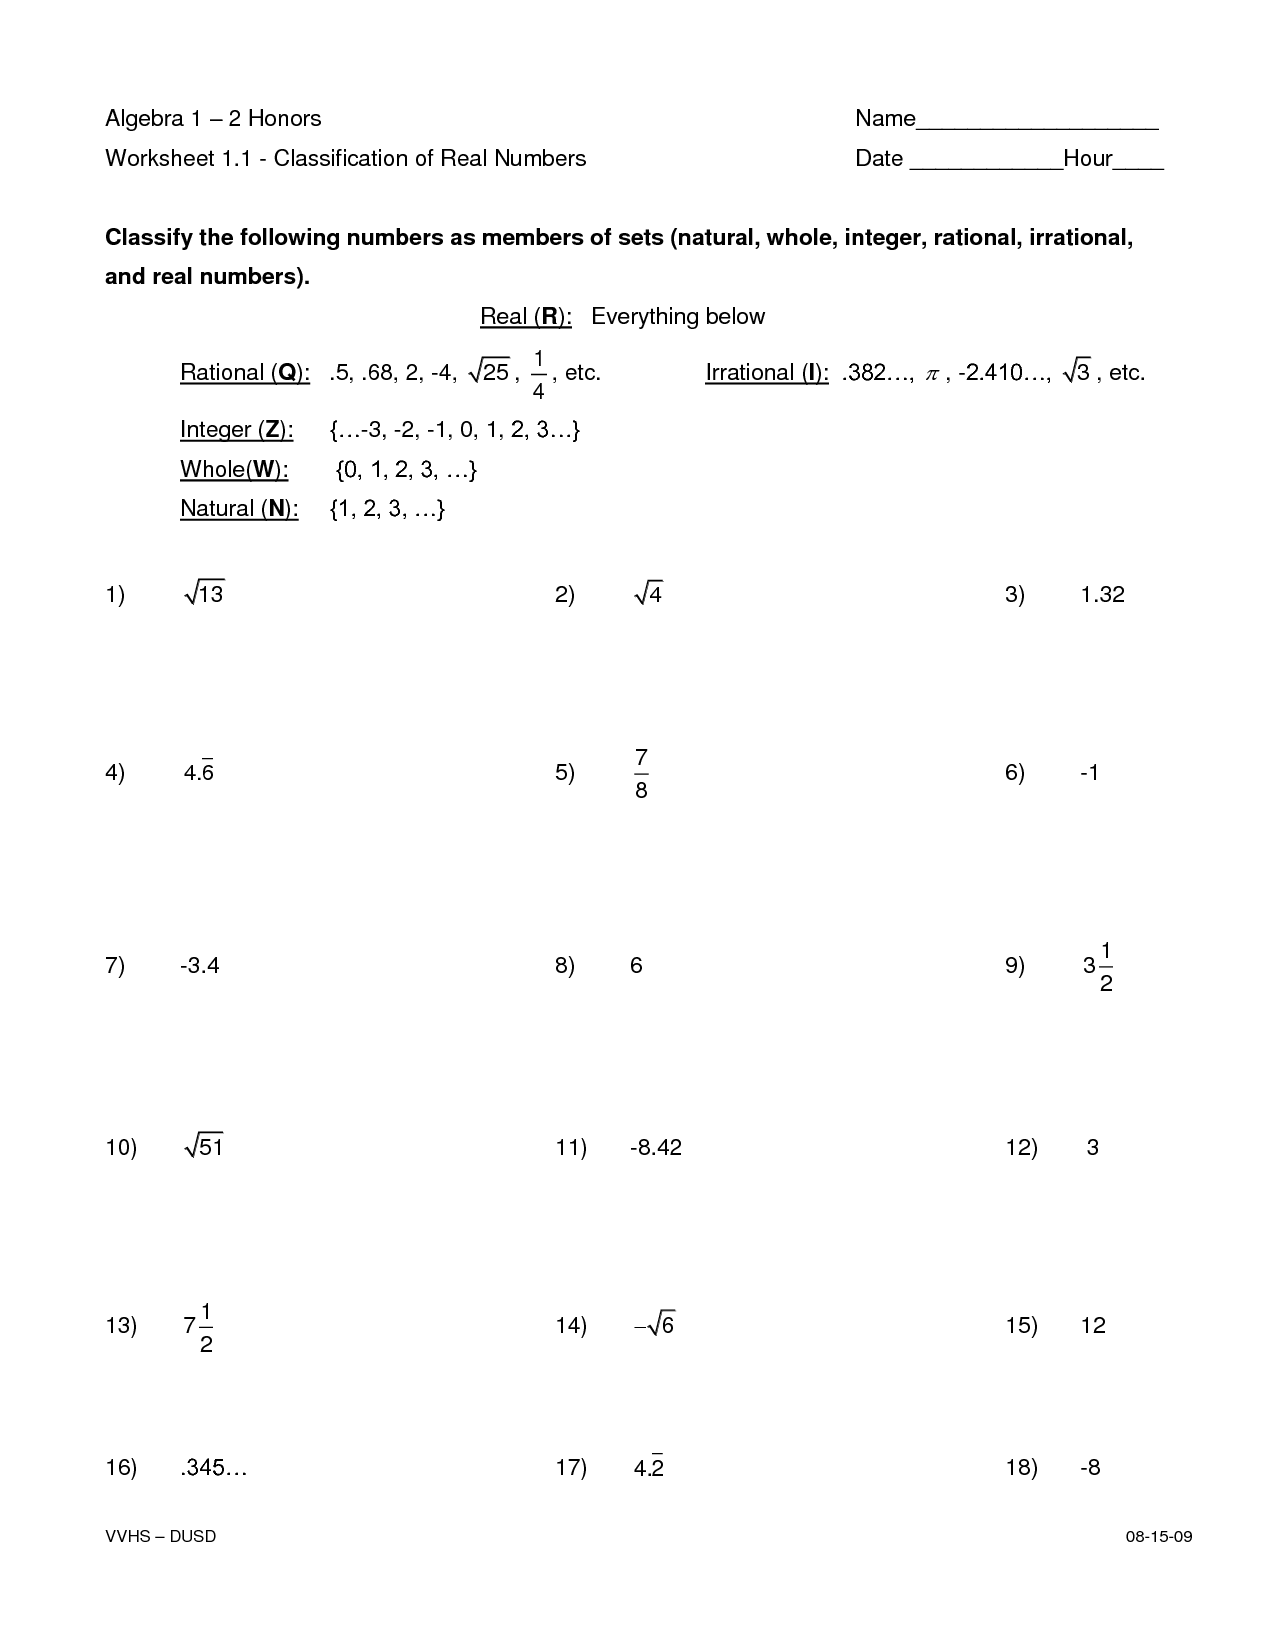 Classifying Rational Numbers Worksheet Image